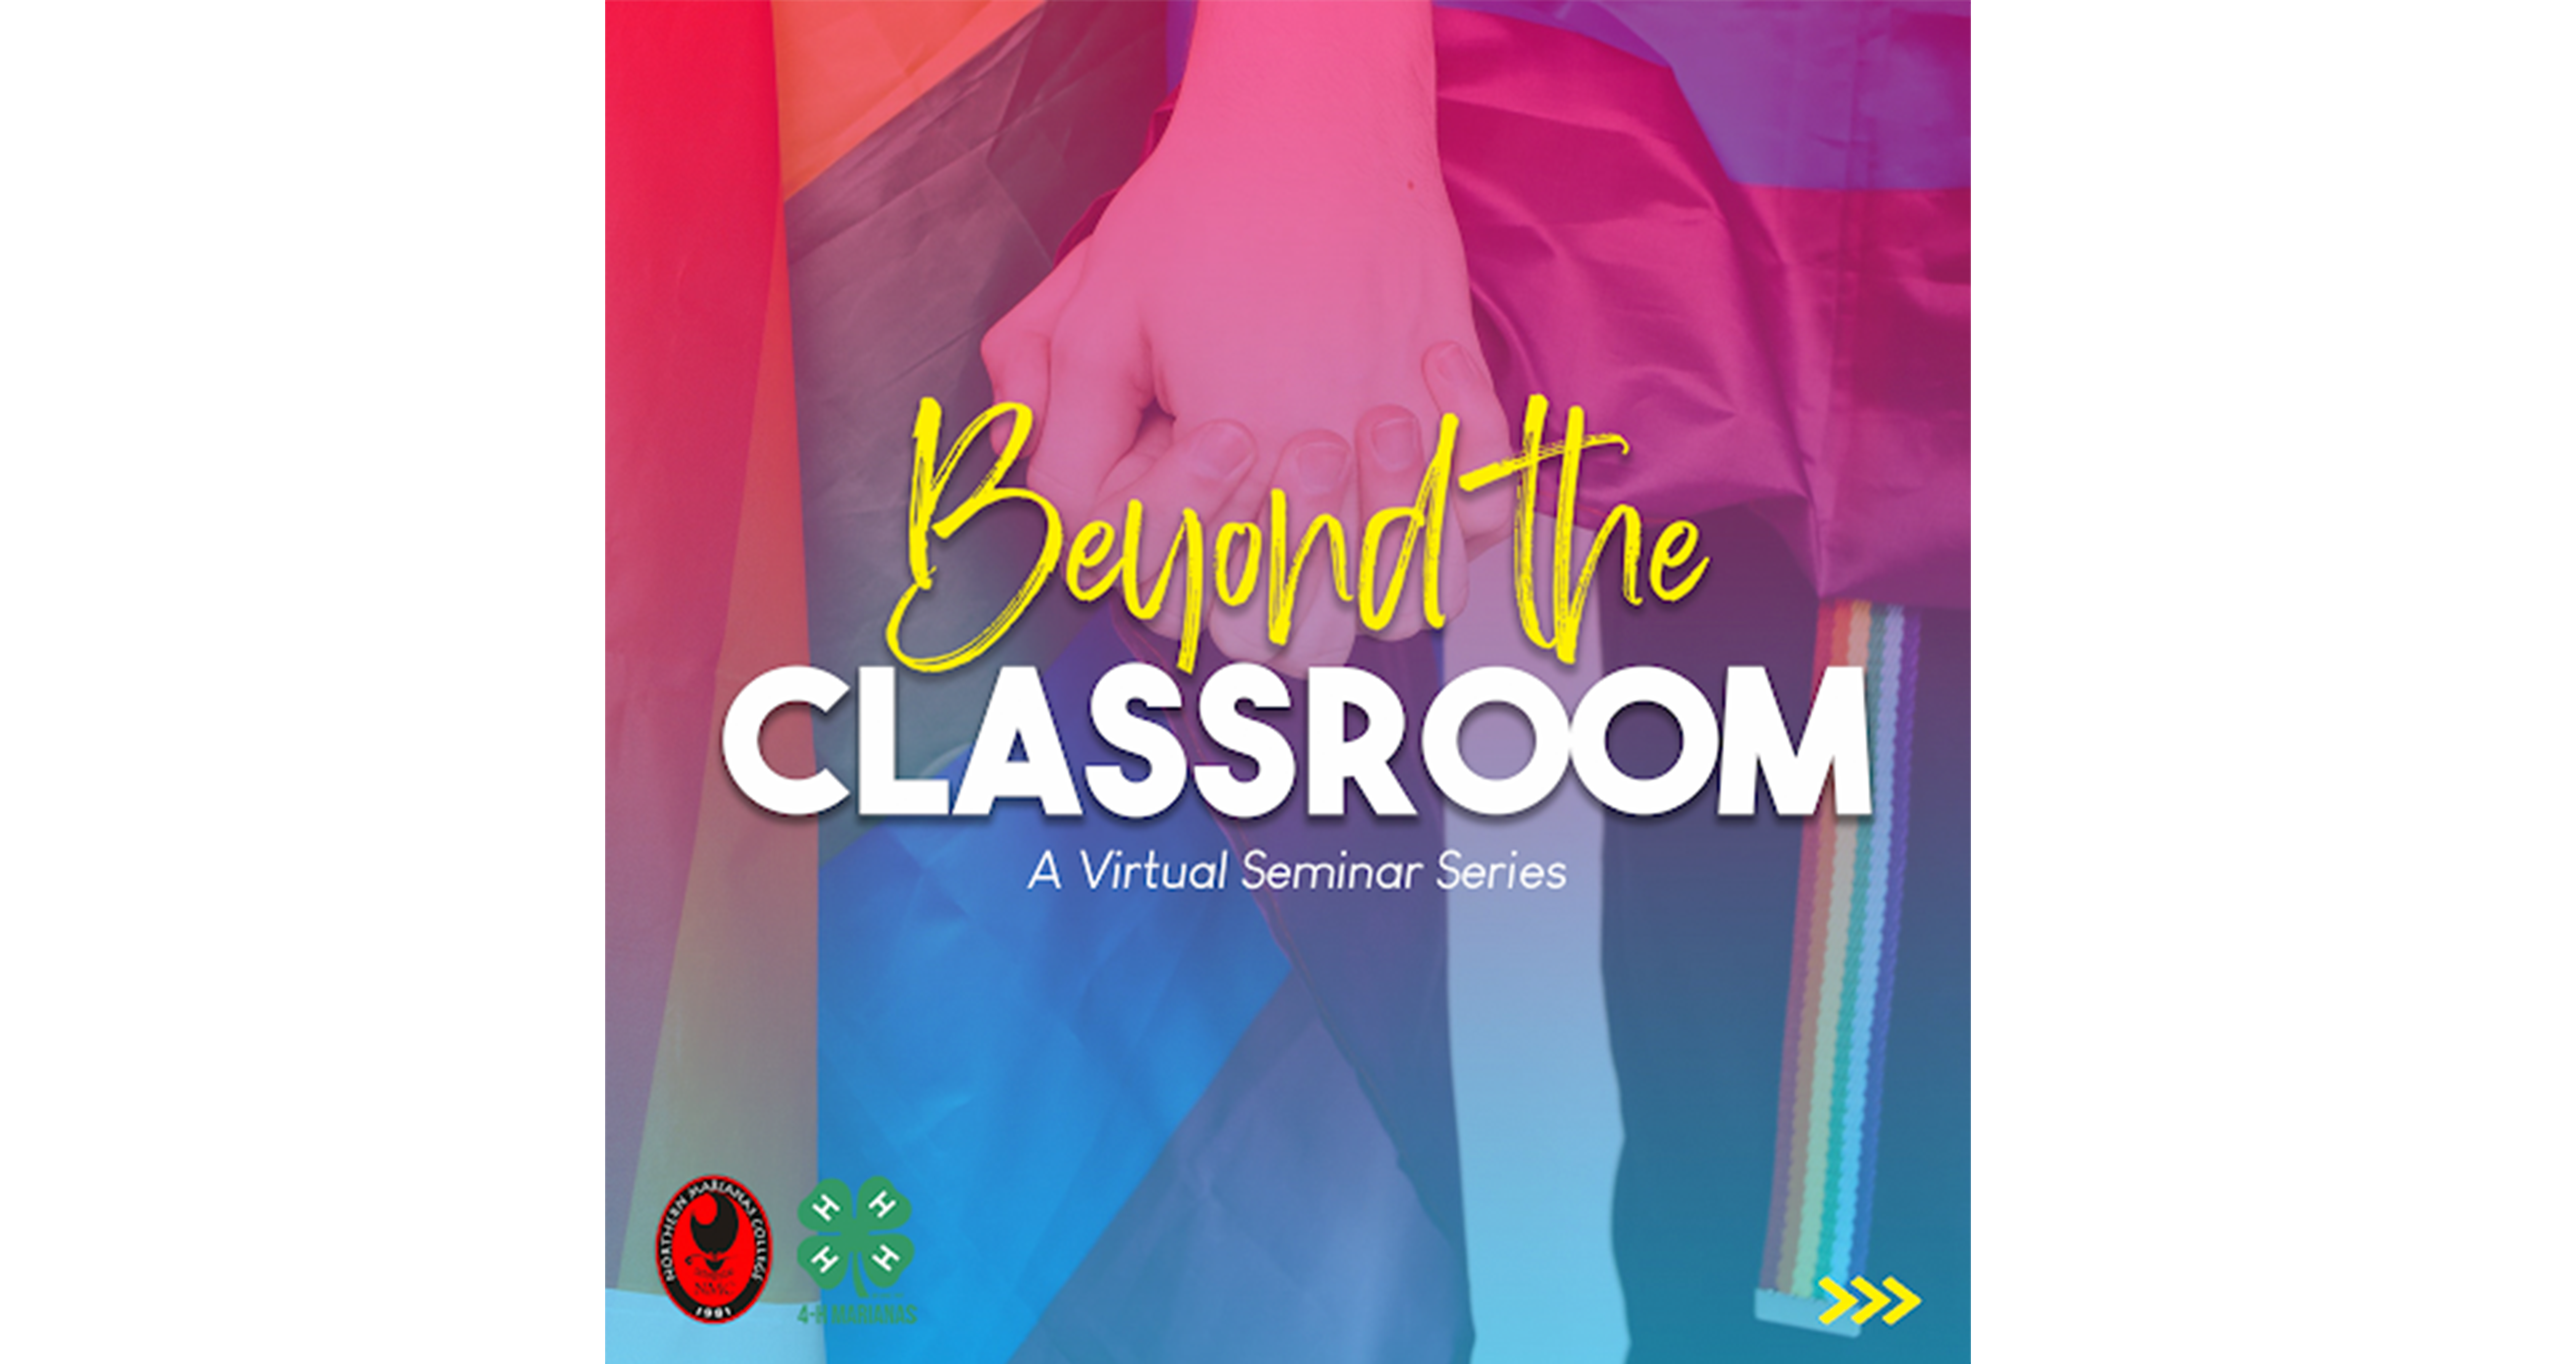 Beyond the Classroom: How to be Allies